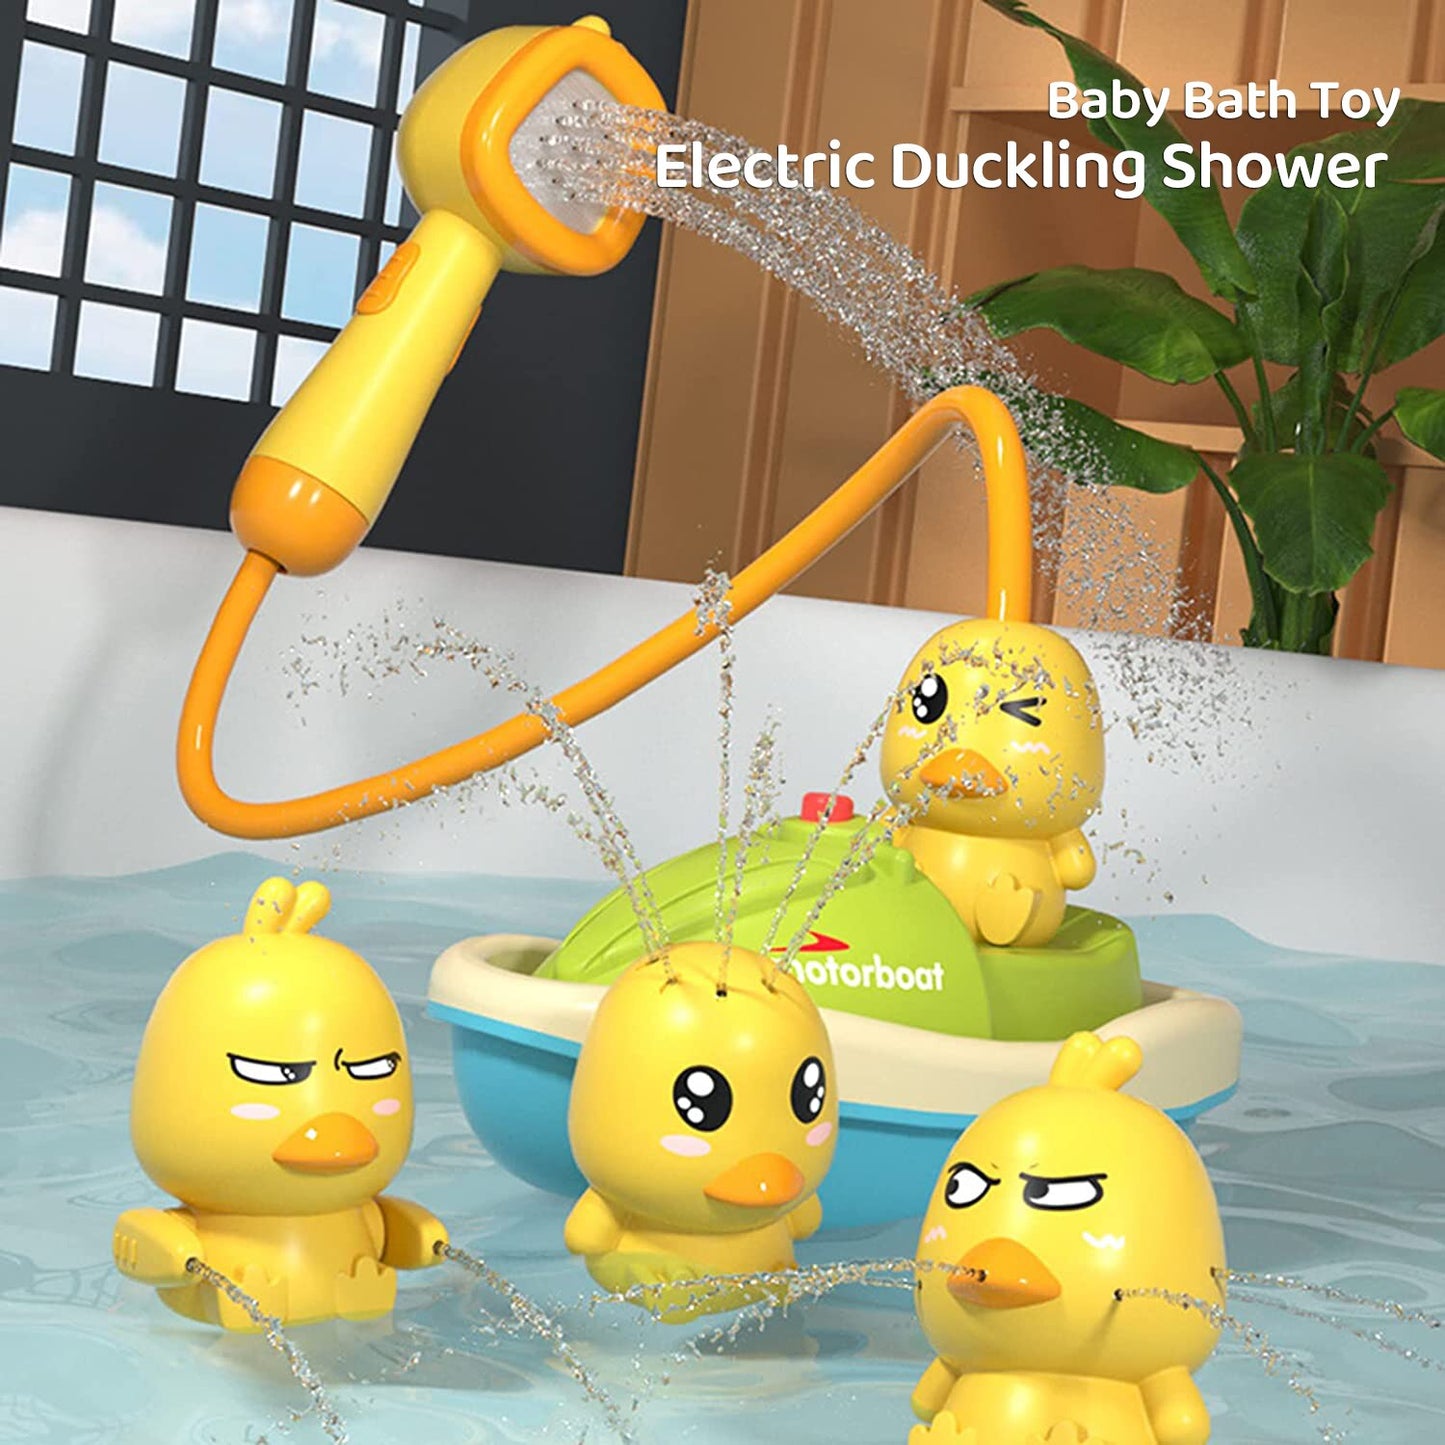 Electric Duckling Bath Toys - Fun Water Play for Kids & Toddlers